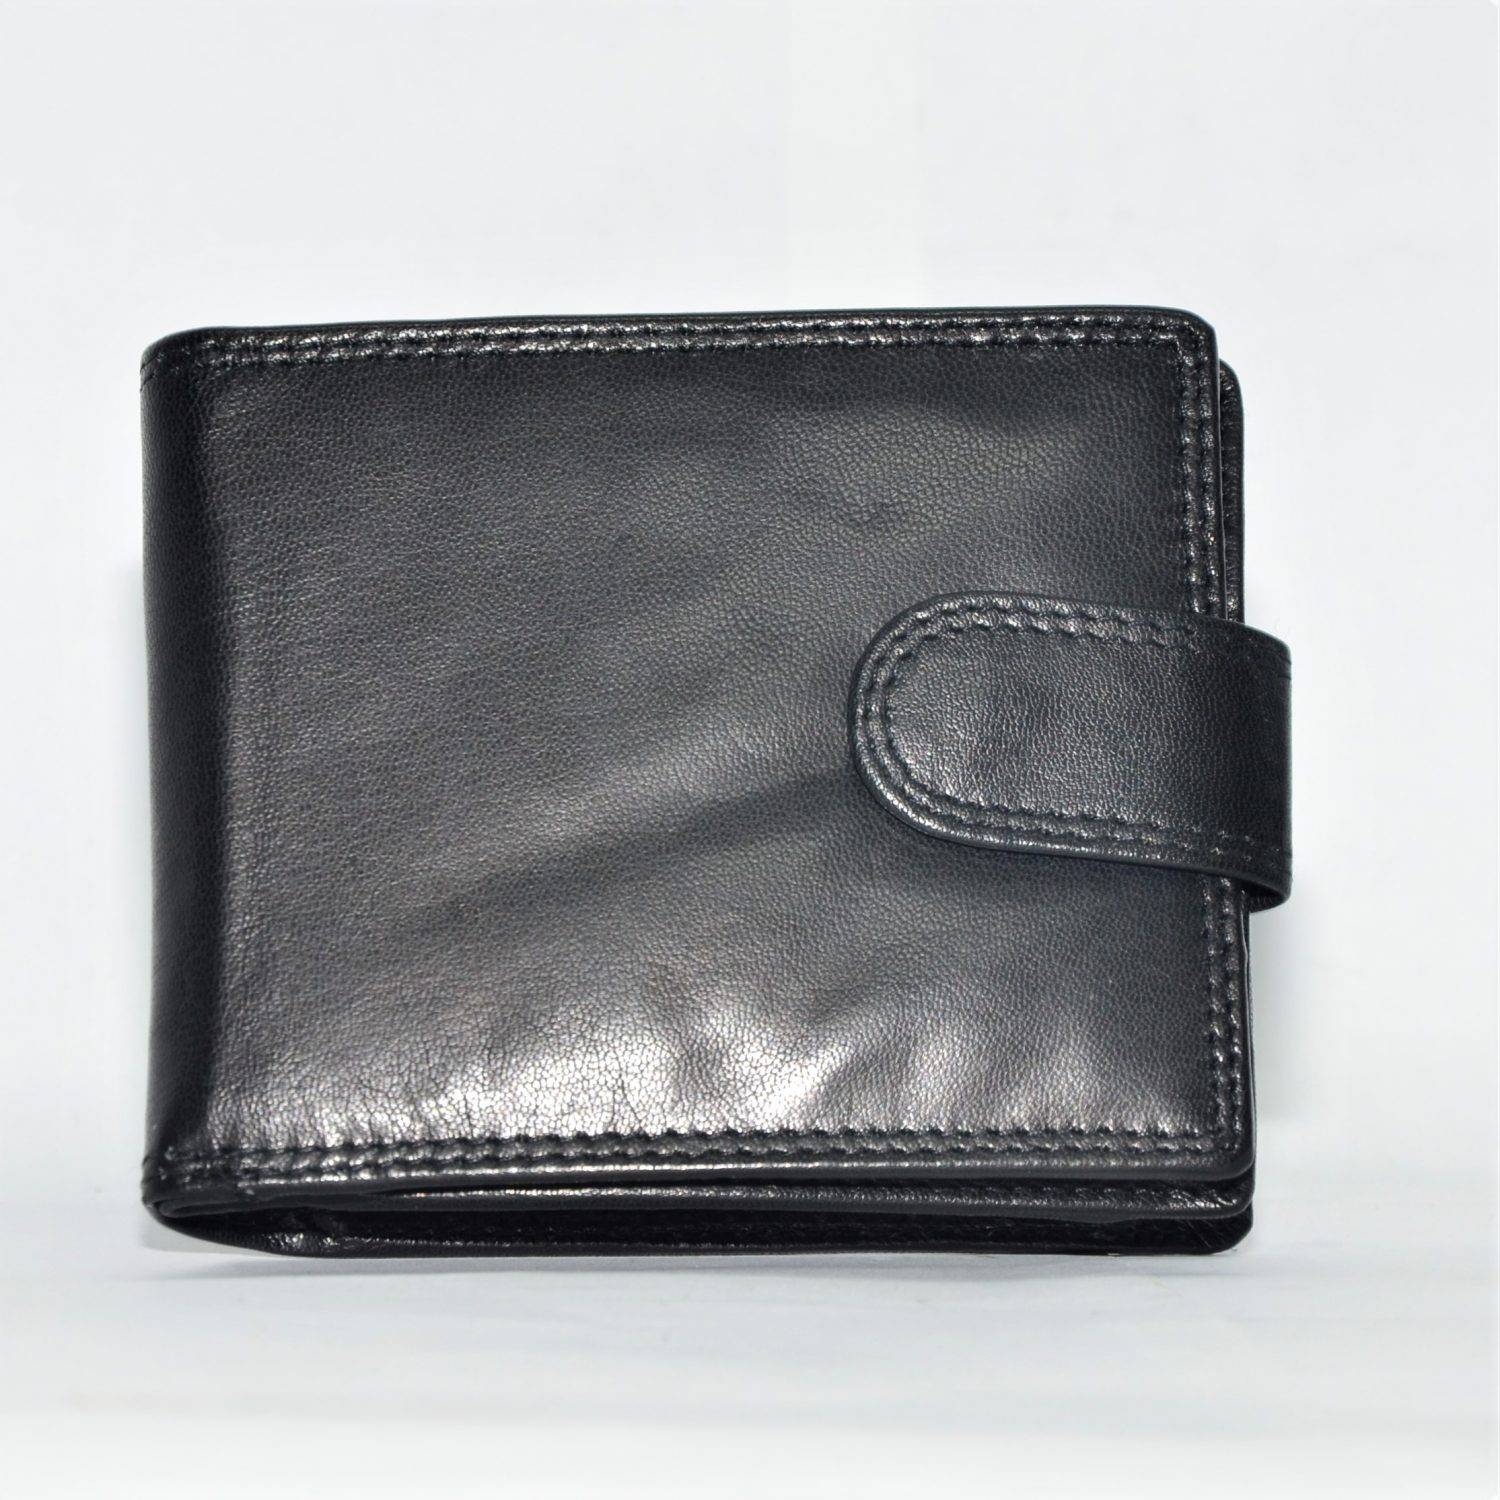 Primehide Leather RFID Wallet - Style No. 7044 - OJP Products